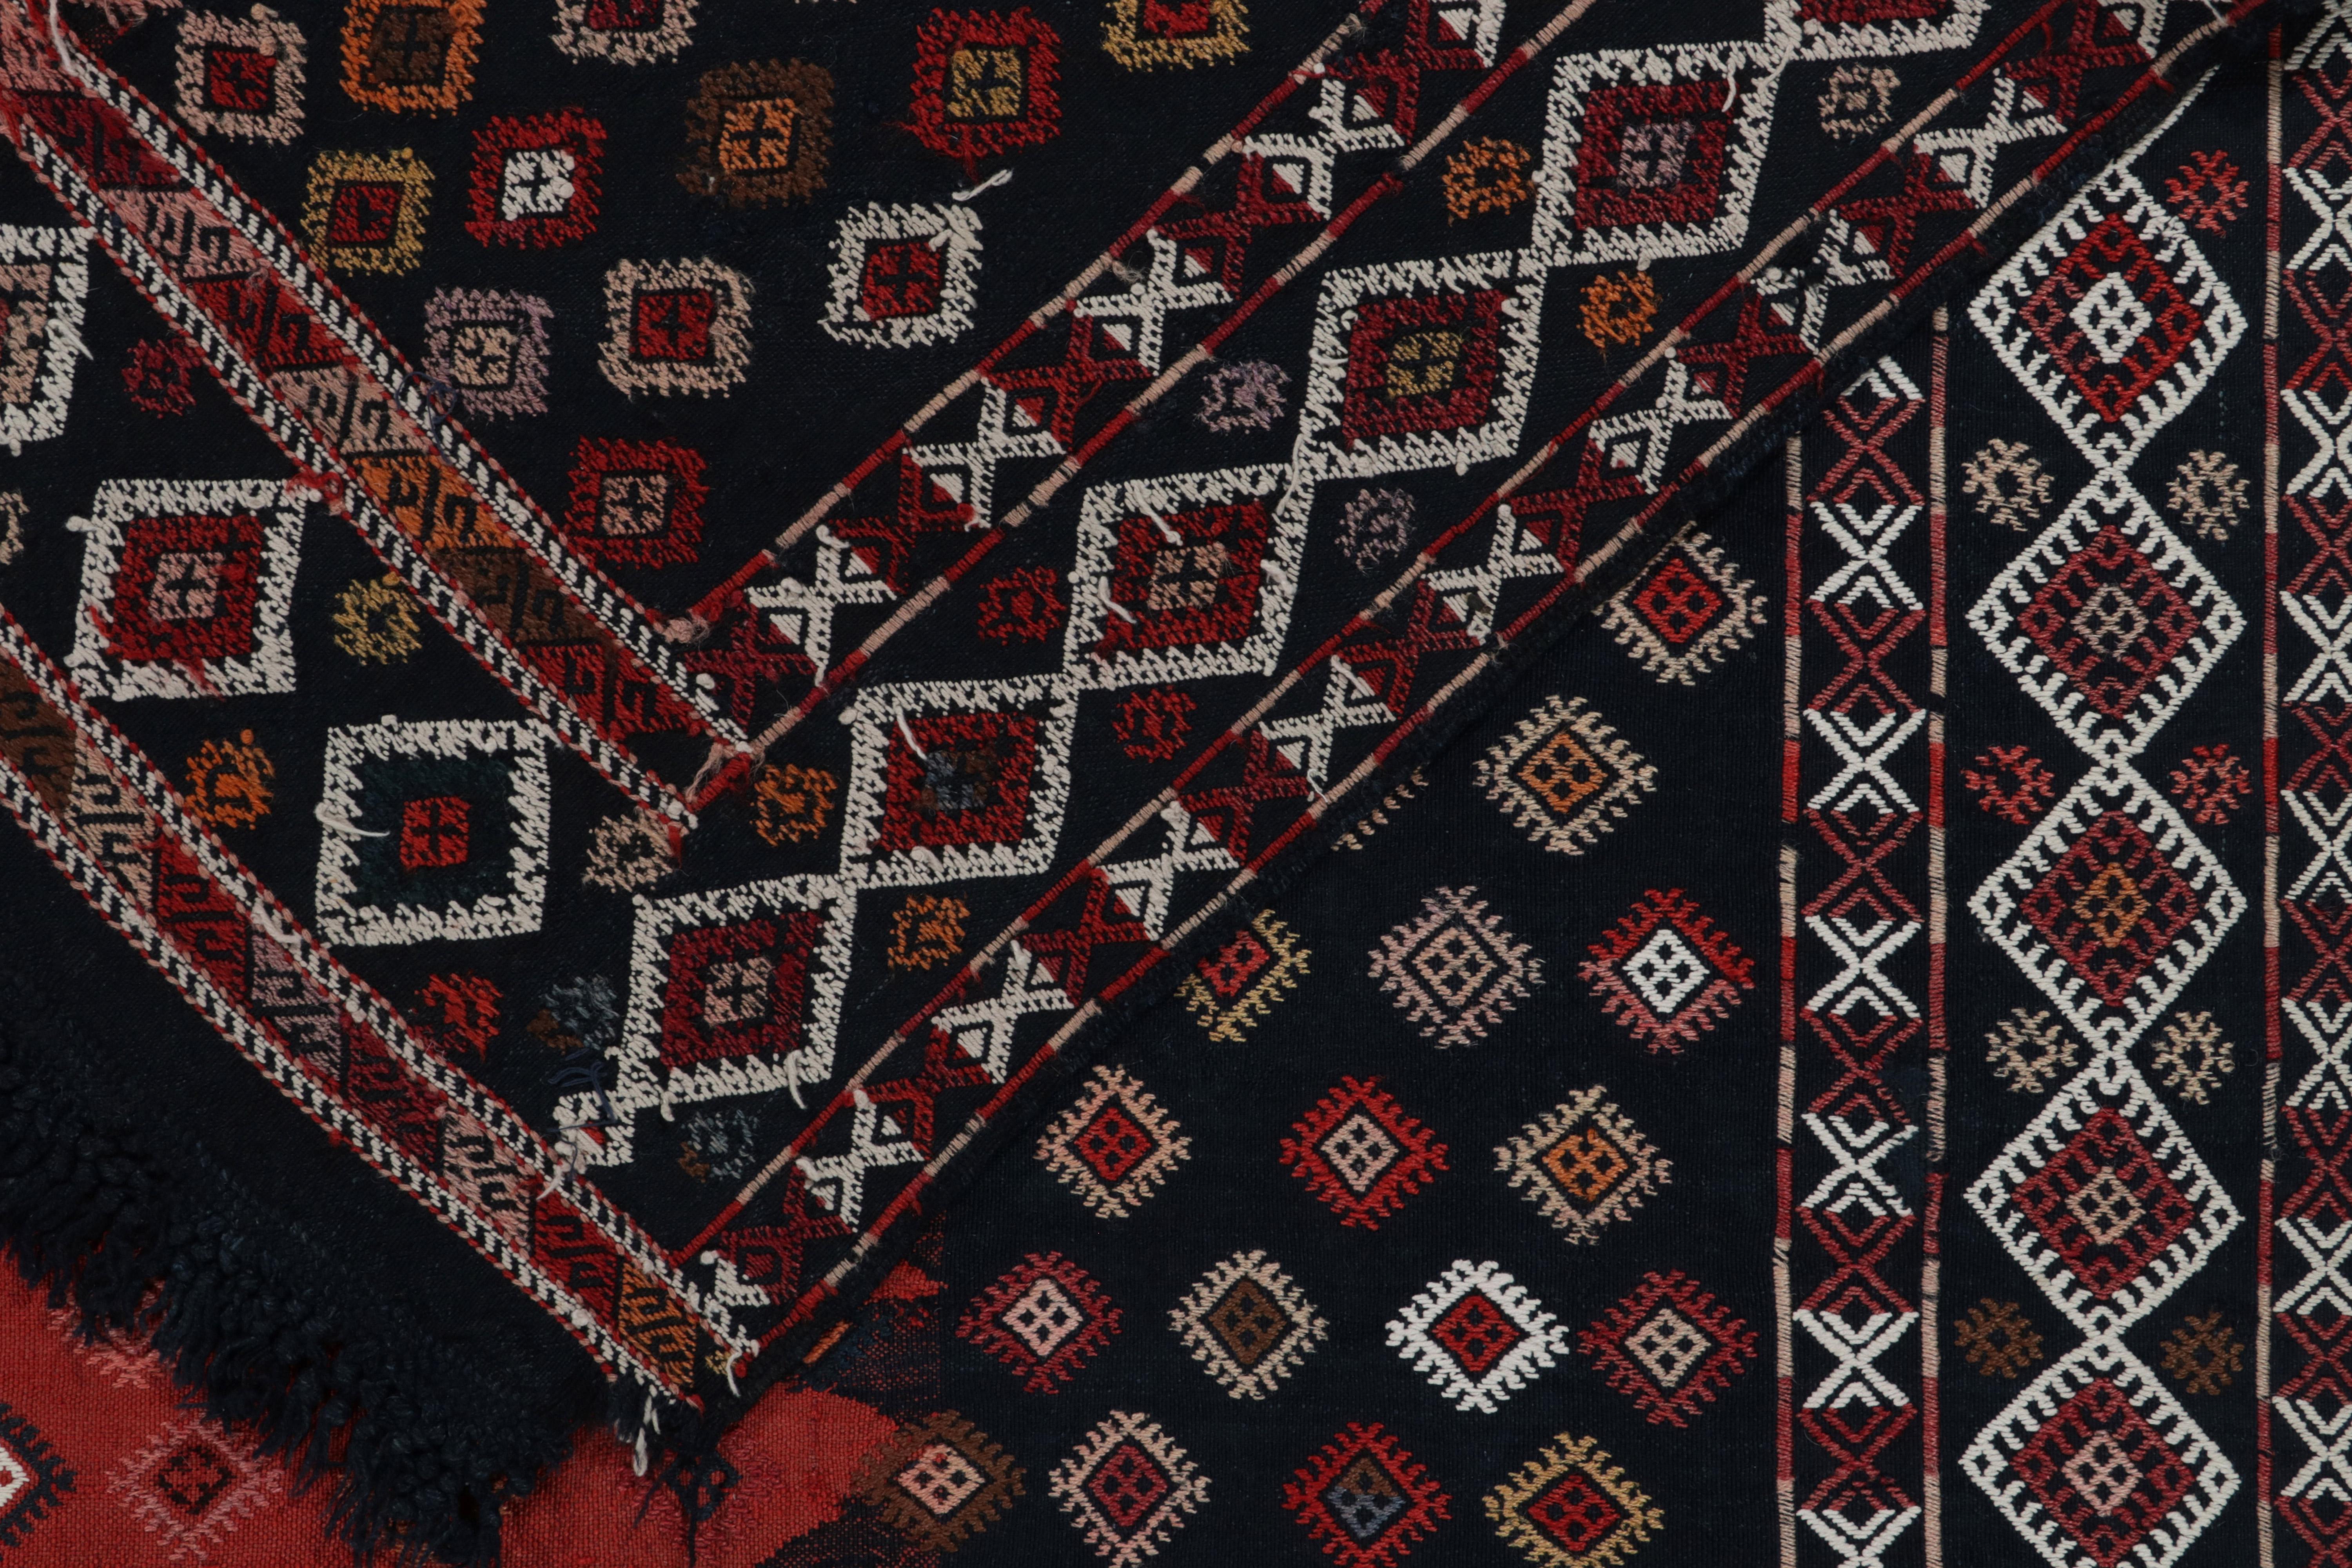 Antique Verneh Kilim Rug in Red, Black & White Geometric Pattern by Rug & Kilim In Good Condition For Sale In Long Island City, NY